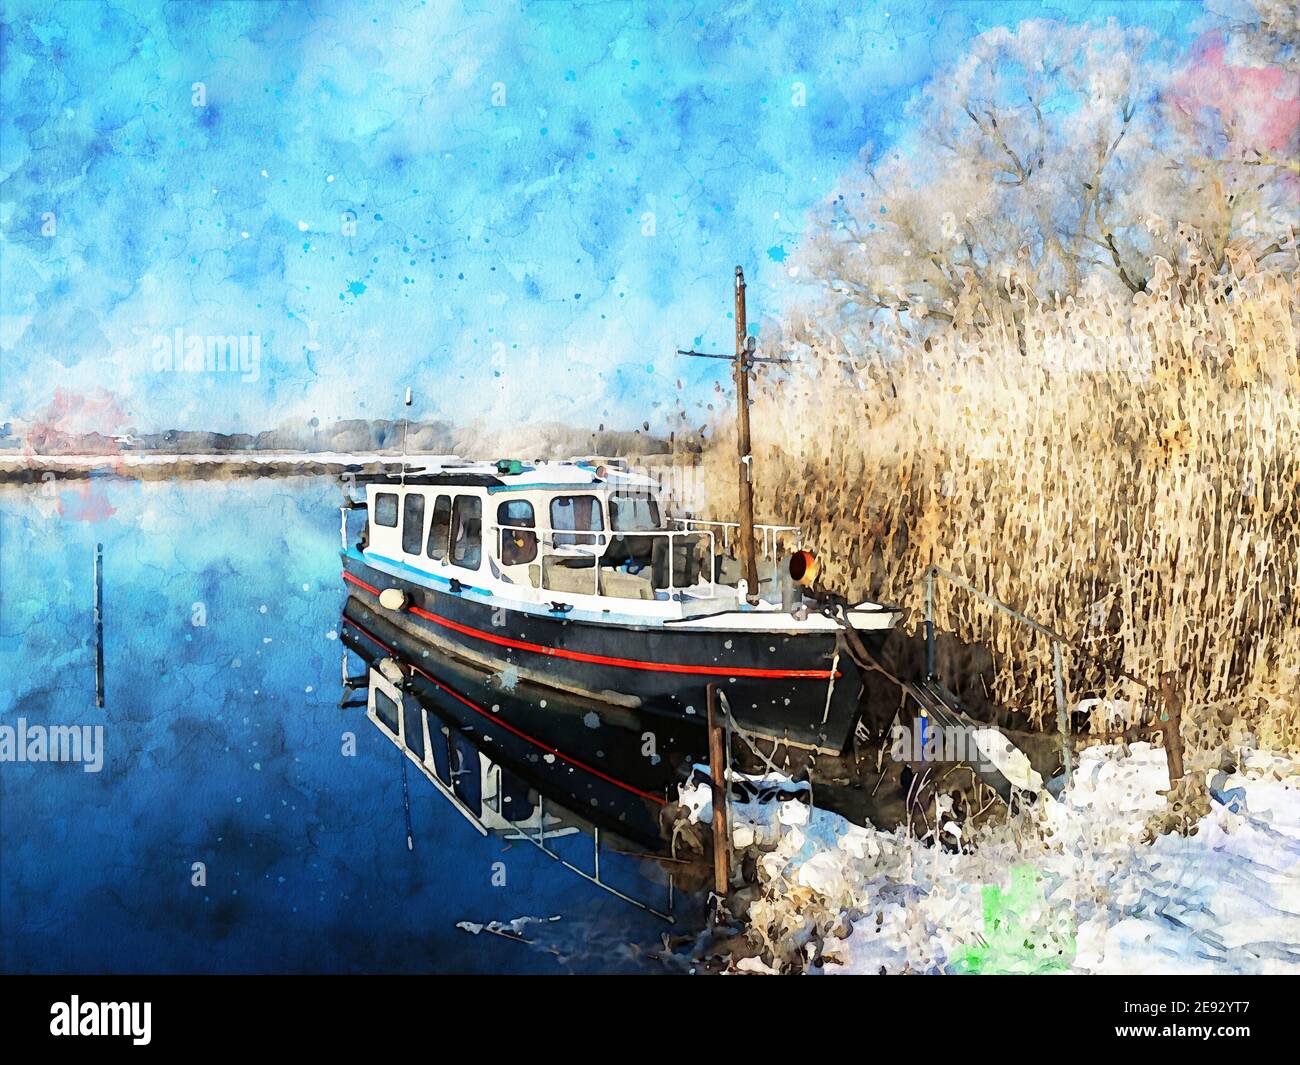 Snowy winter landscape on the Havel River in Havelland. Boat in water. Watercolour painting Stock Photo